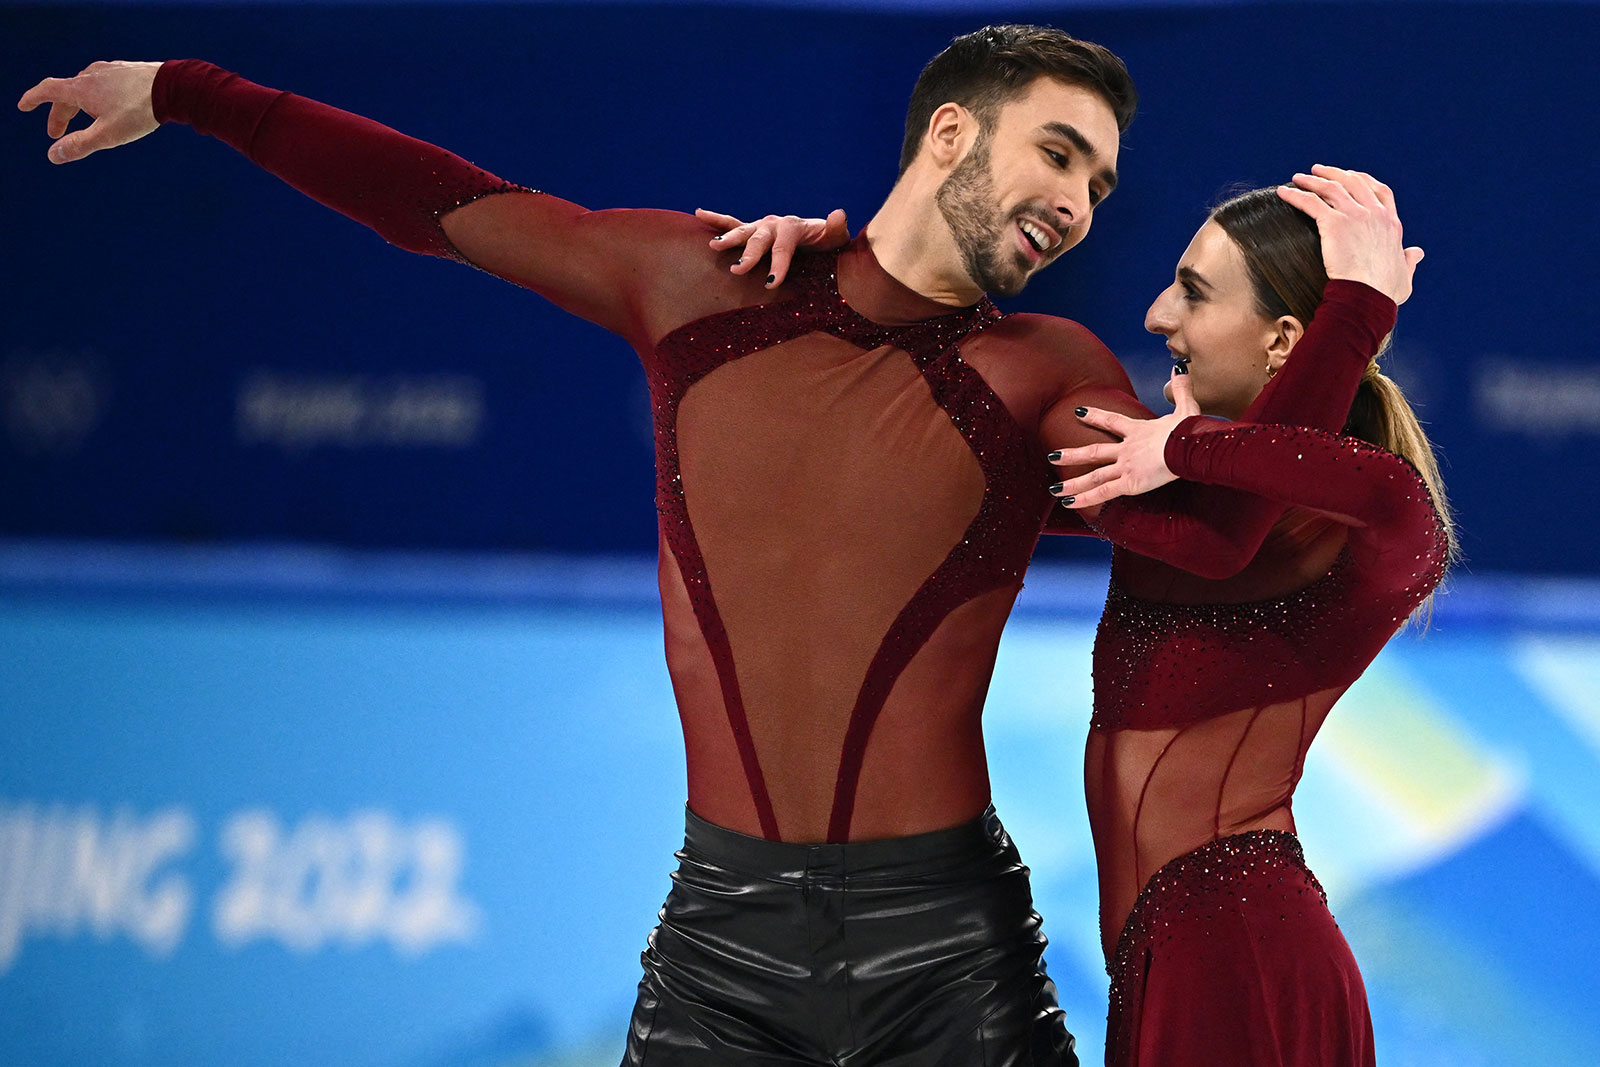 French ice skating duo Guillaume Cizeron and Gabriella Papadakis compete in the ice rhythm dance event on February 12.